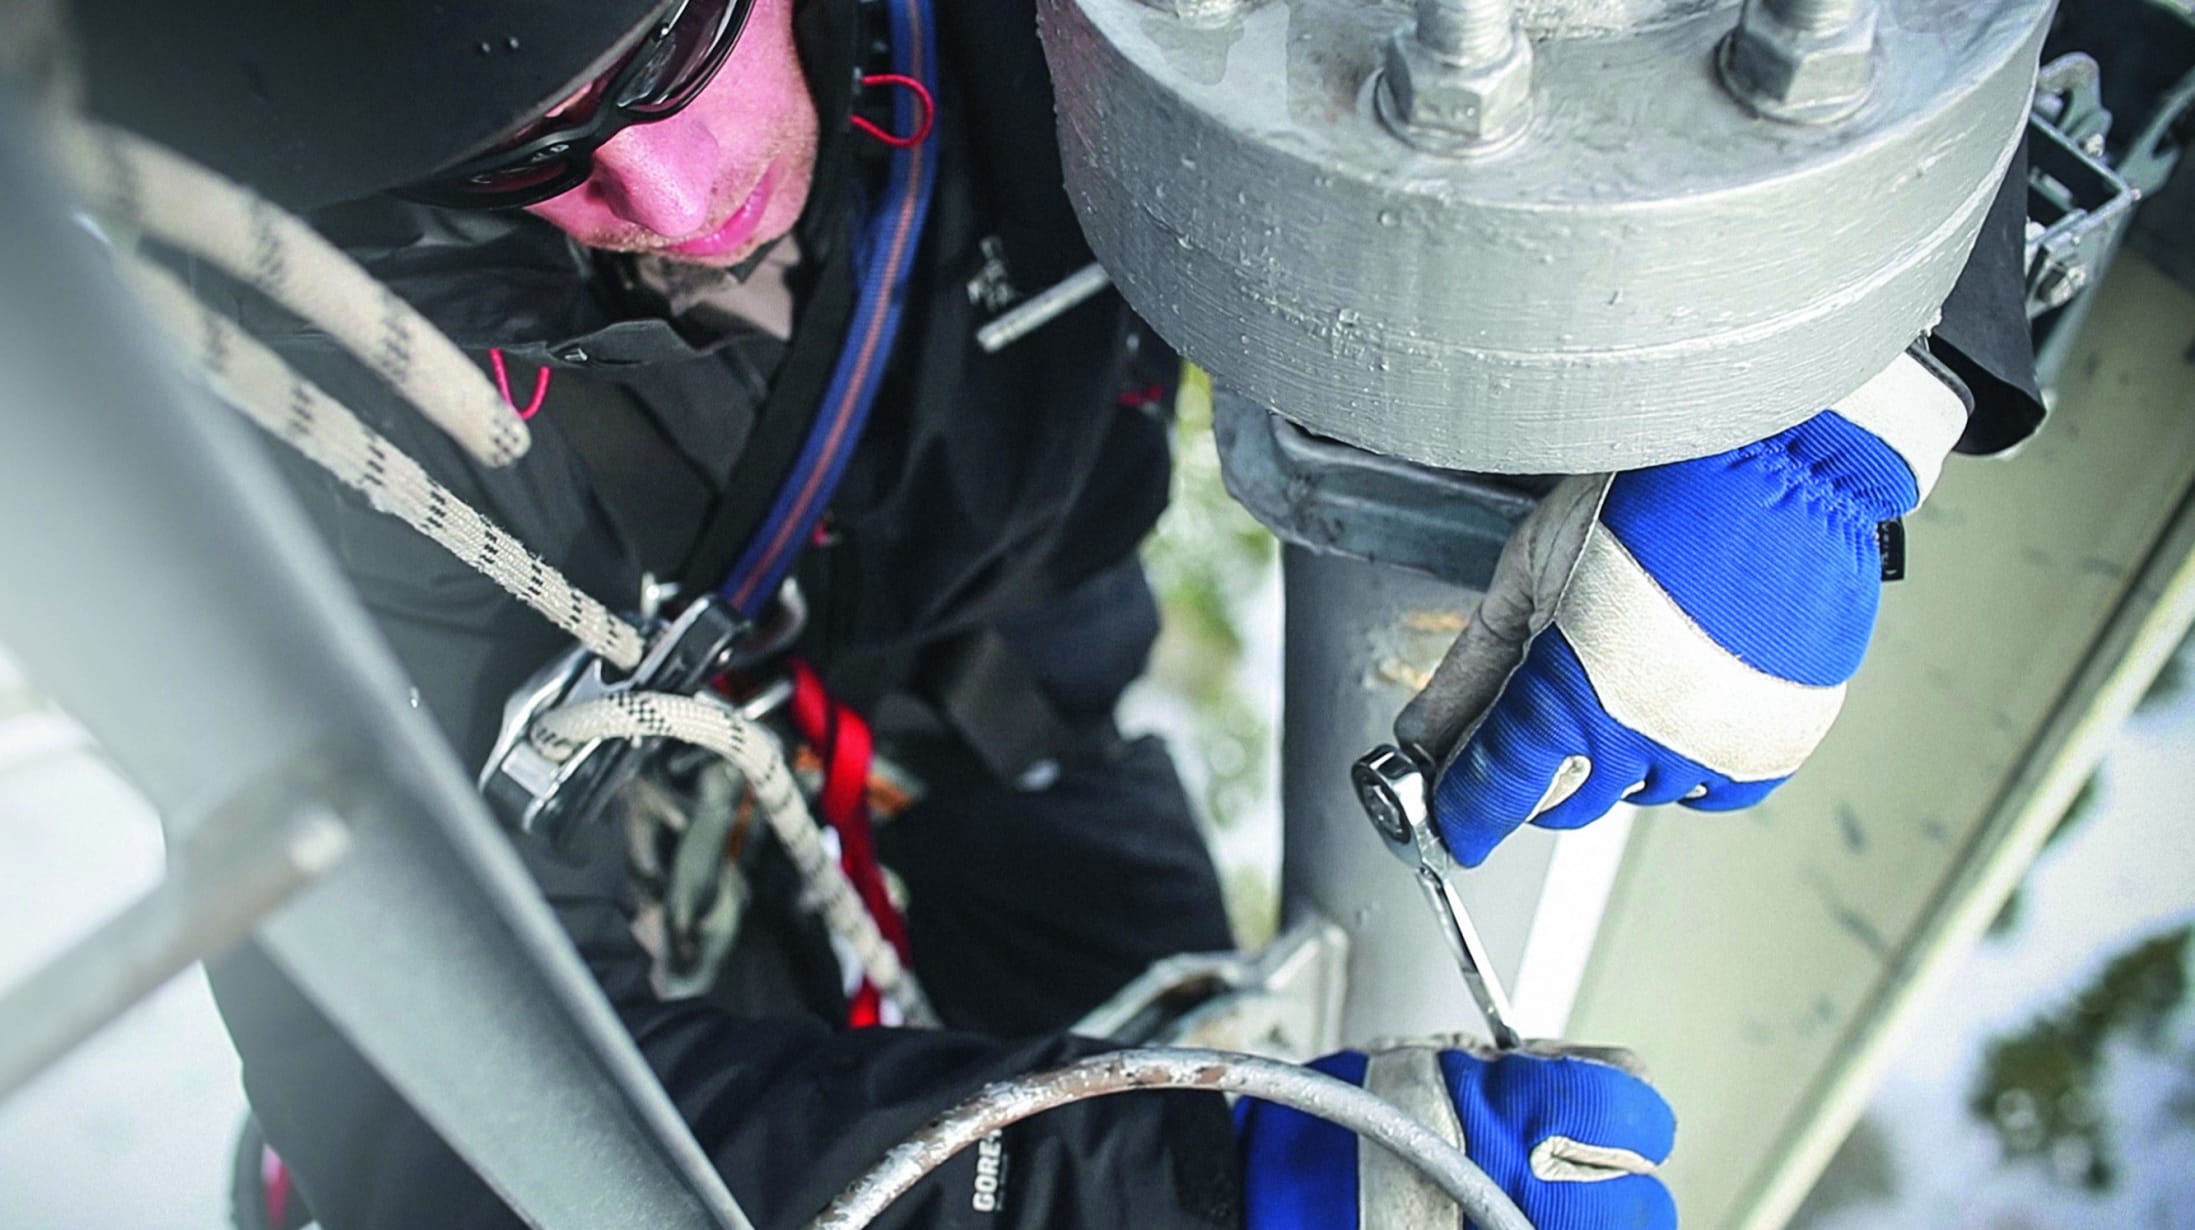 Electrical Hoist Assessment - Ensuring Safety in the Work Area